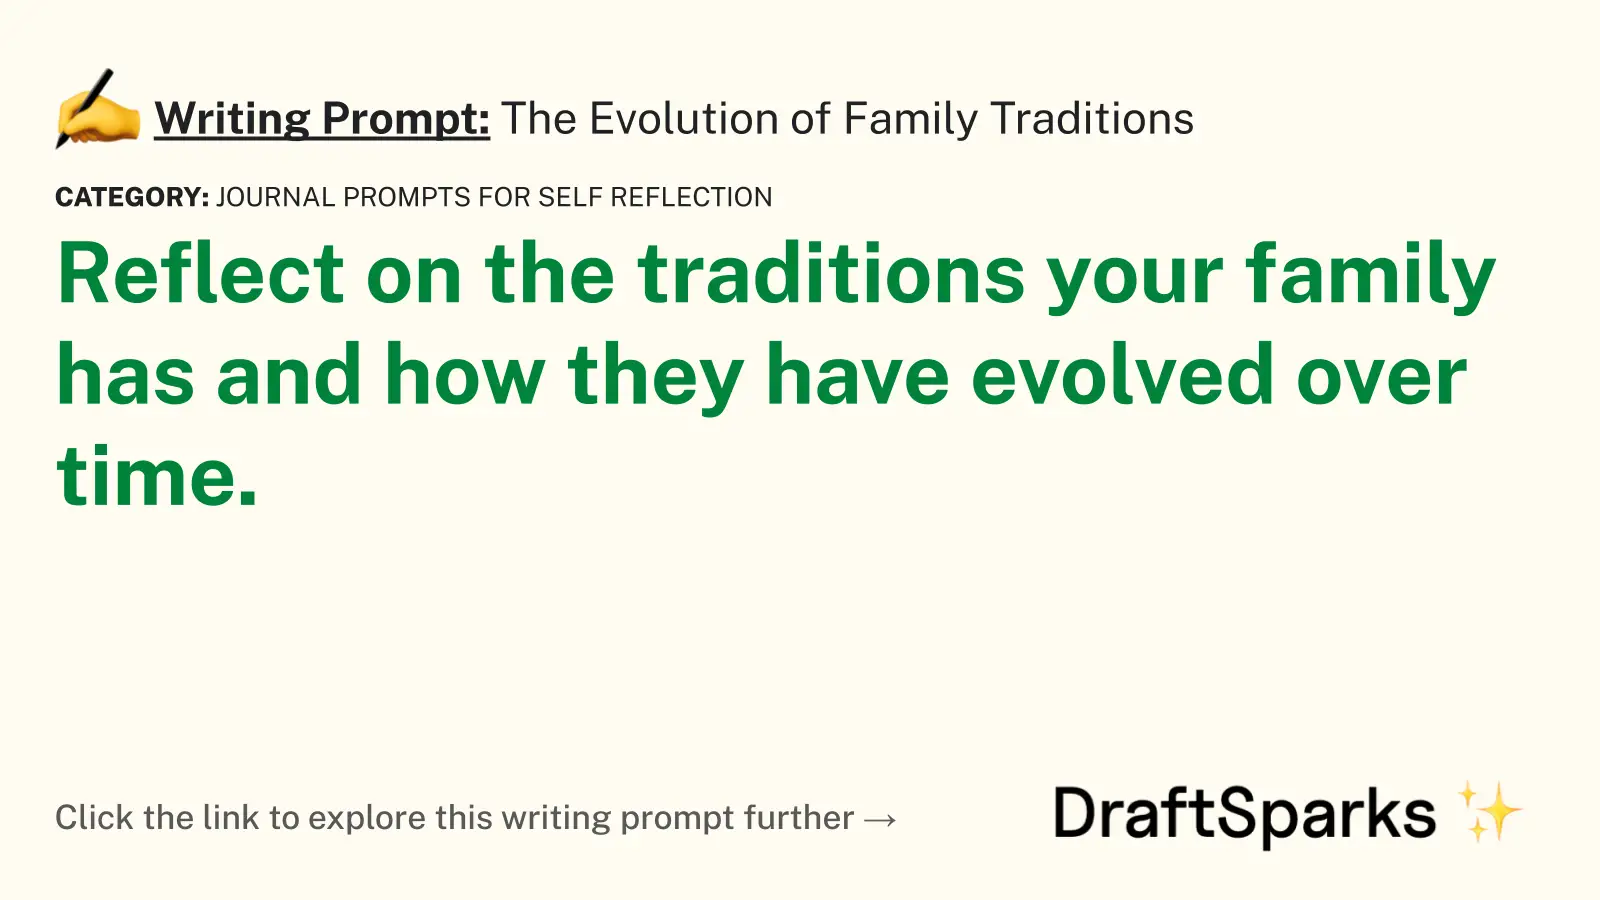 The Evolution of Family Traditions